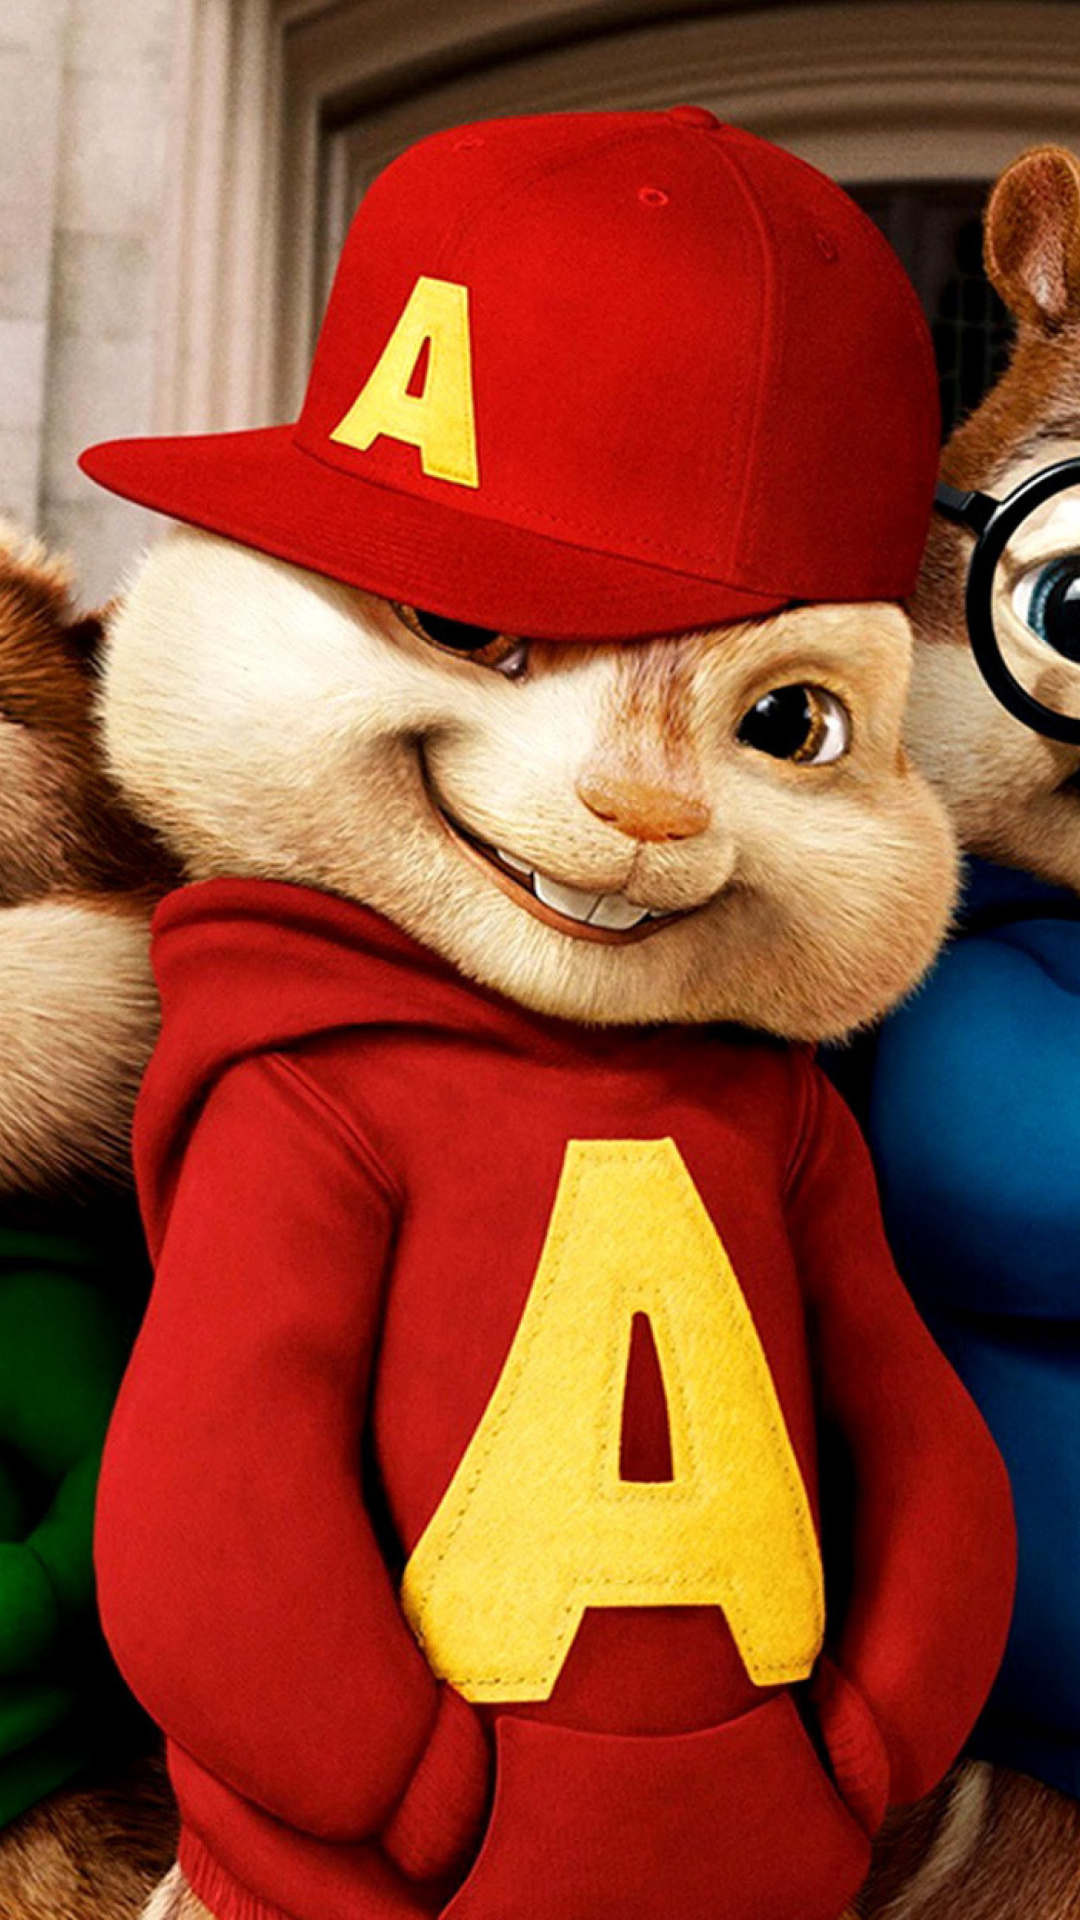 Alvin and the Chipmunks wallpaper 1080x1920